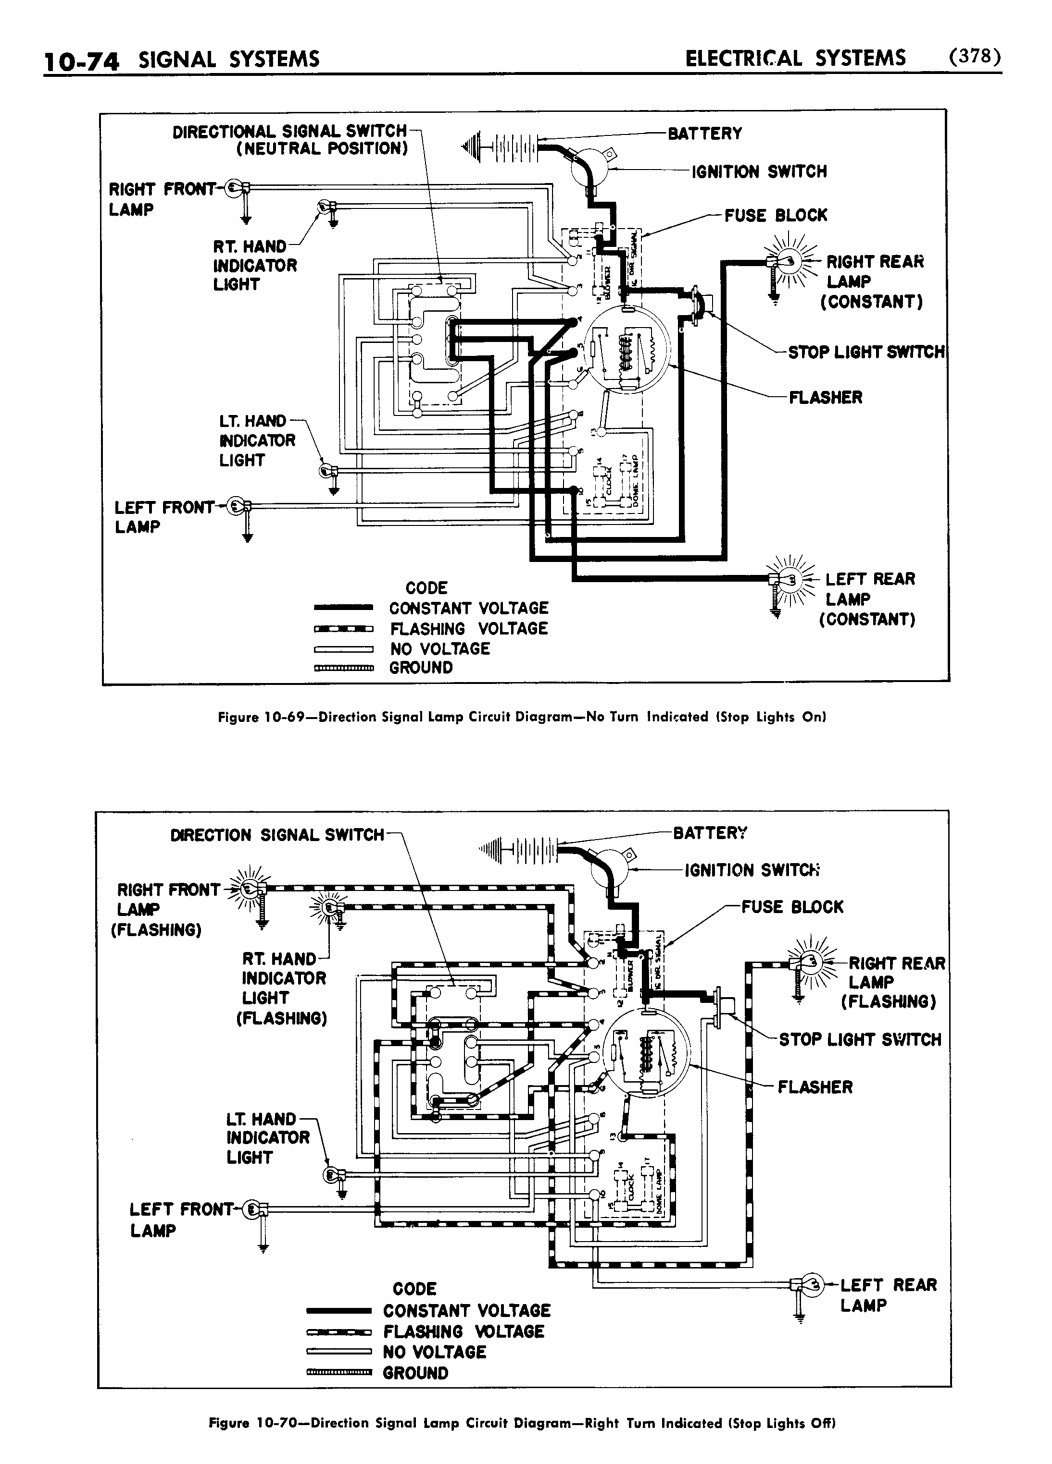 n_11 1955 Buick Shop Manual - Electrical Systems-074-074.jpg